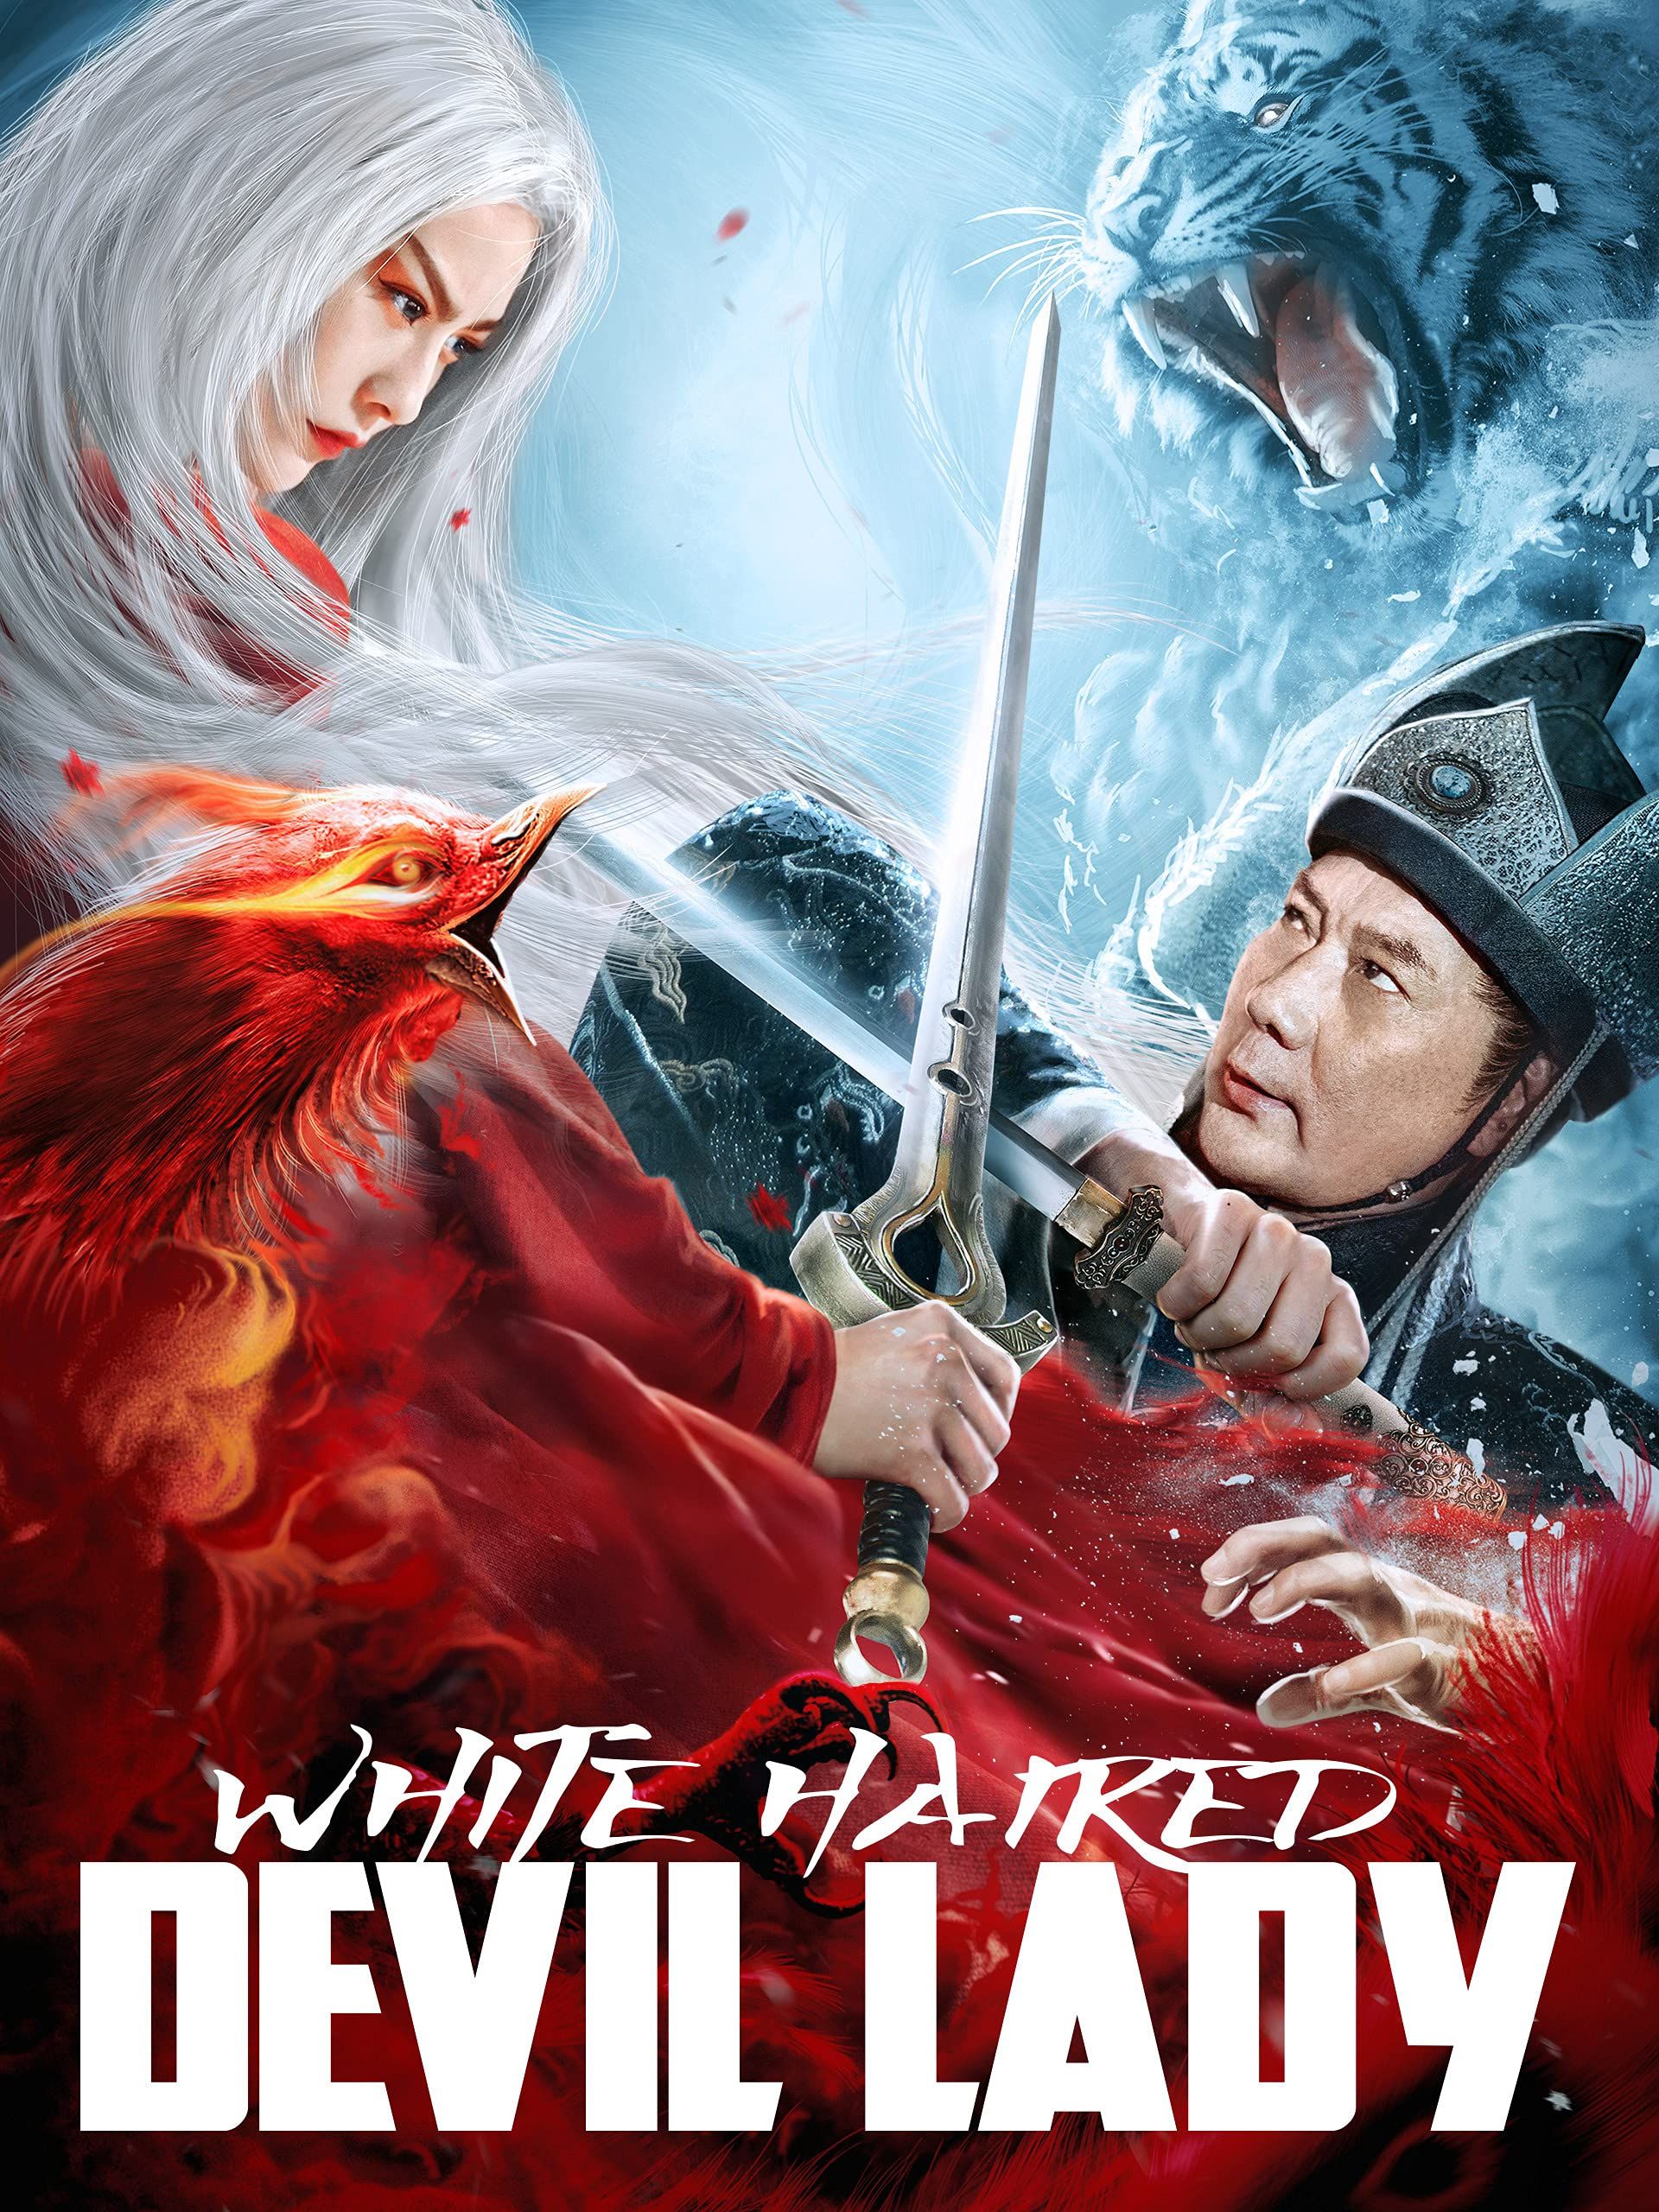 White Haired Devil Lady (2020) Hindi Dubbed HDRip download full movie